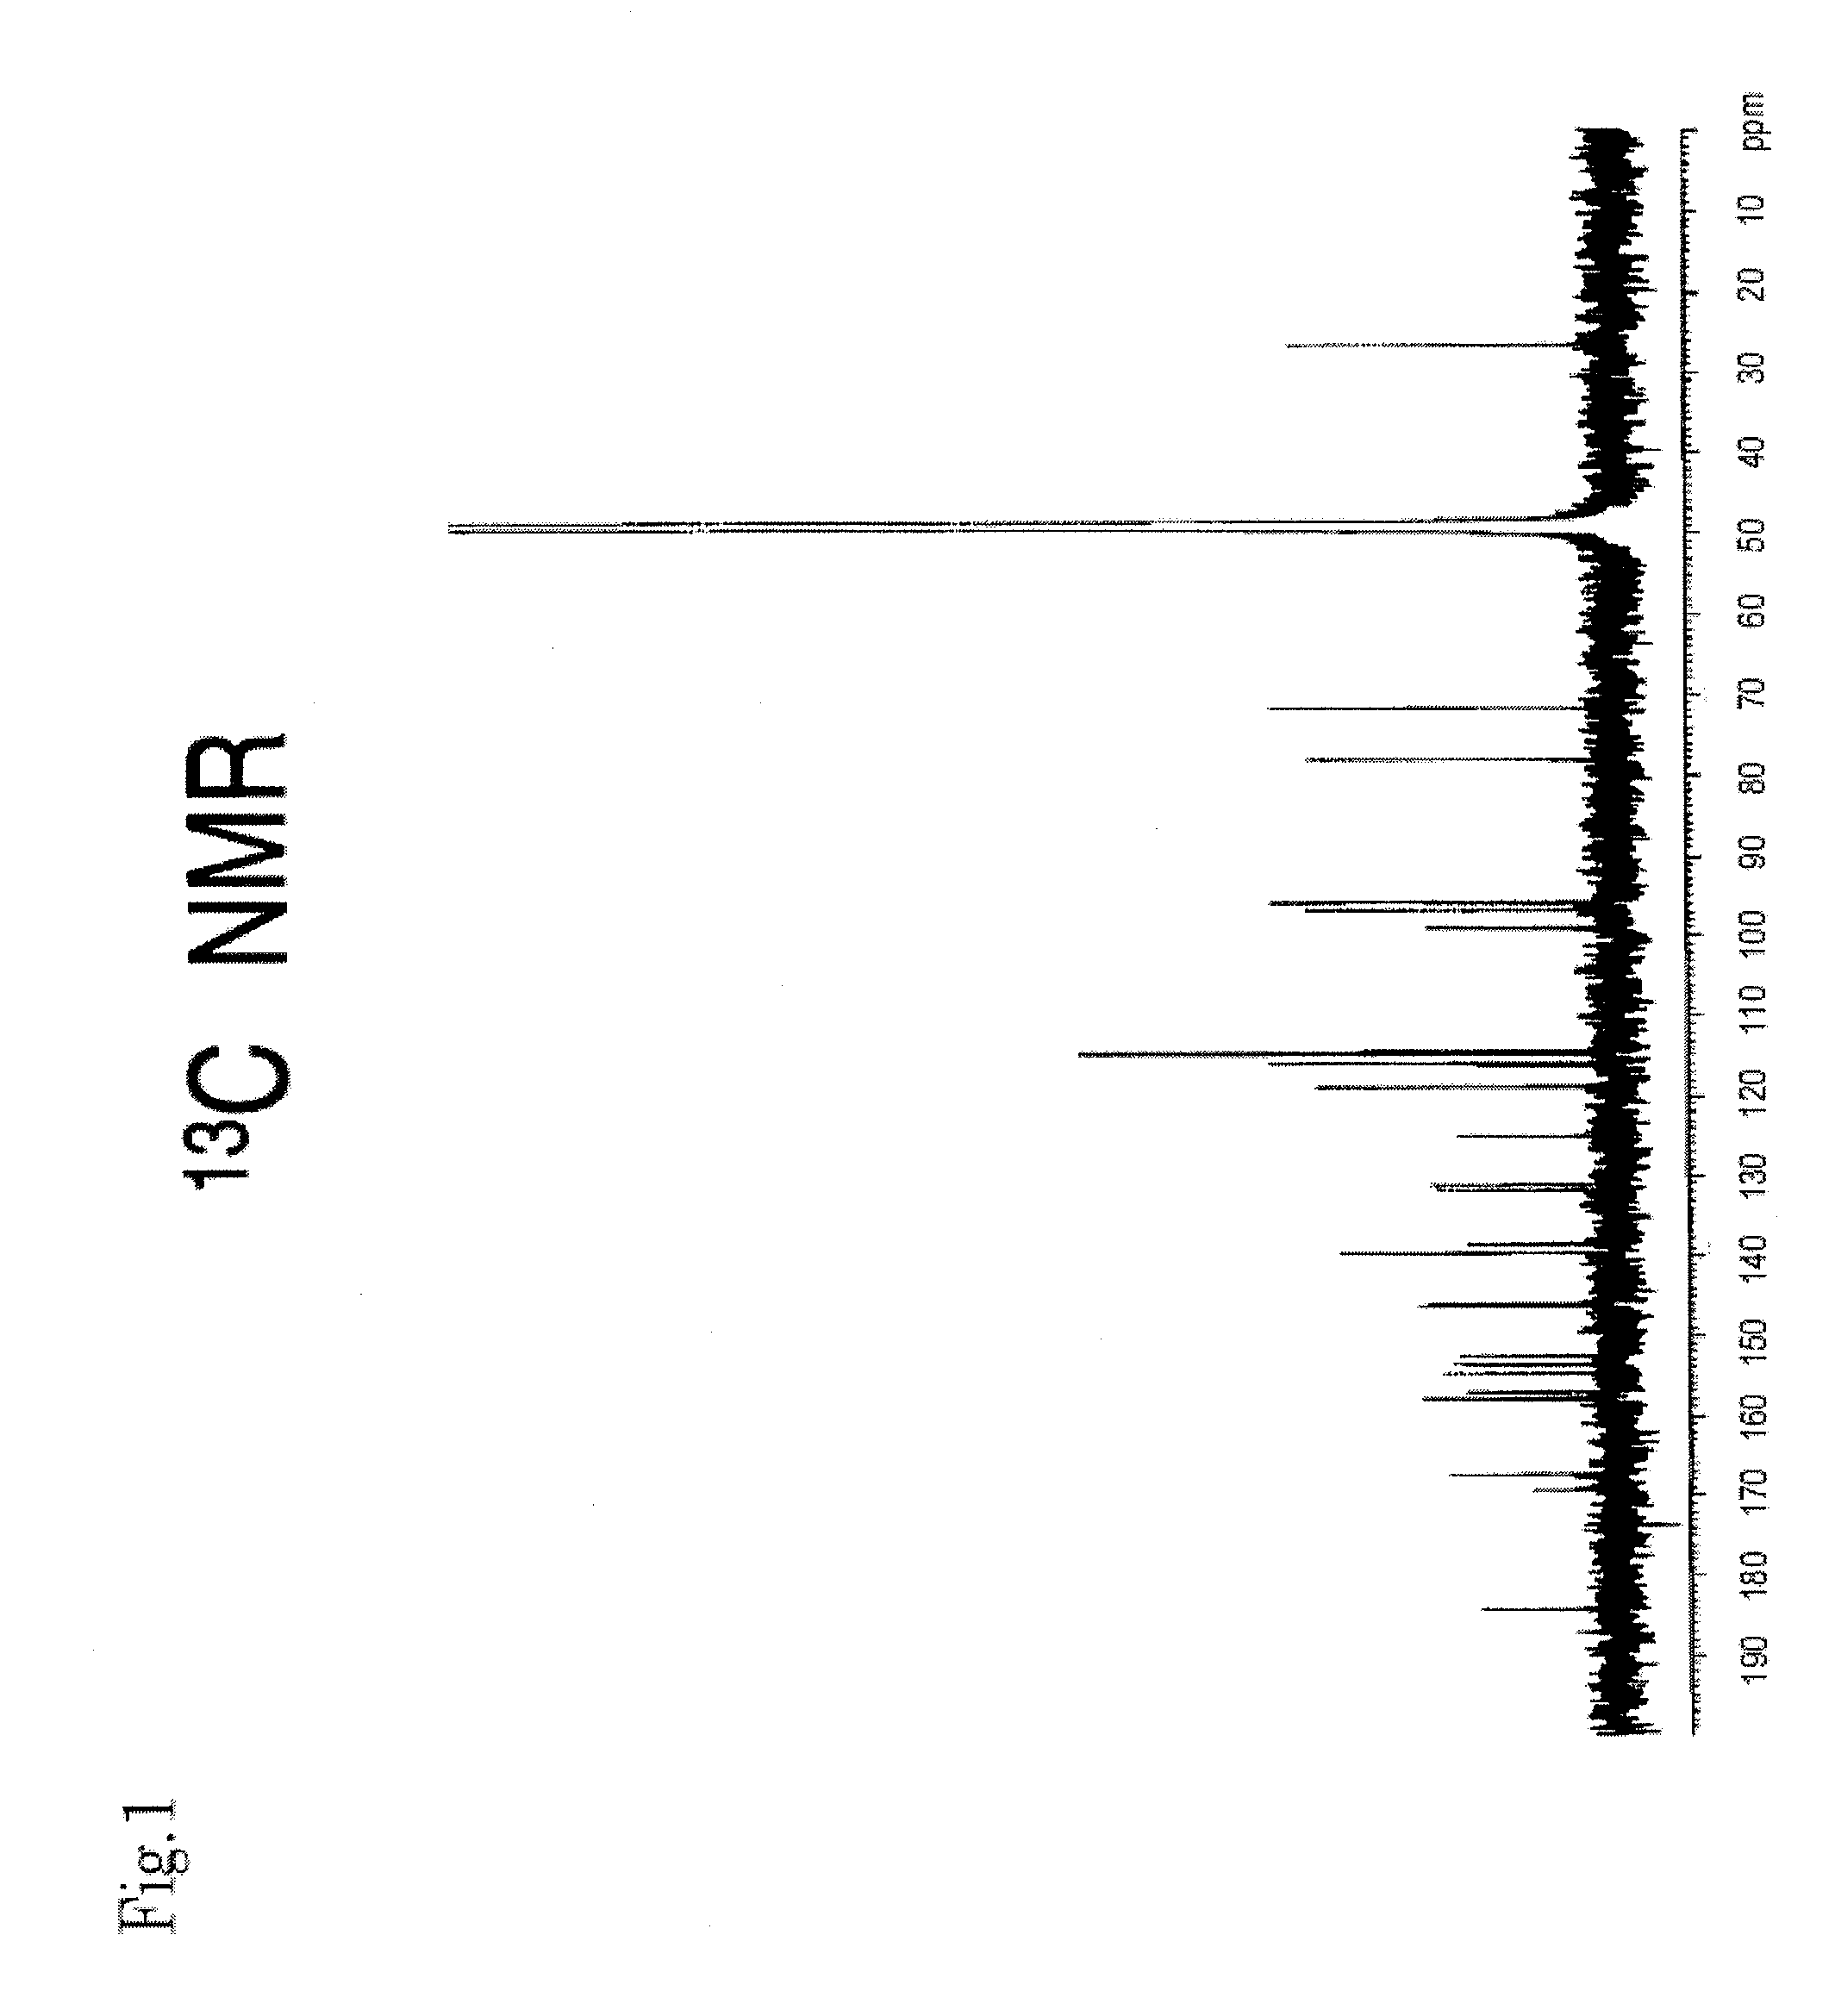 Anti-obesity agent comprising compound containing benzotropolone ring